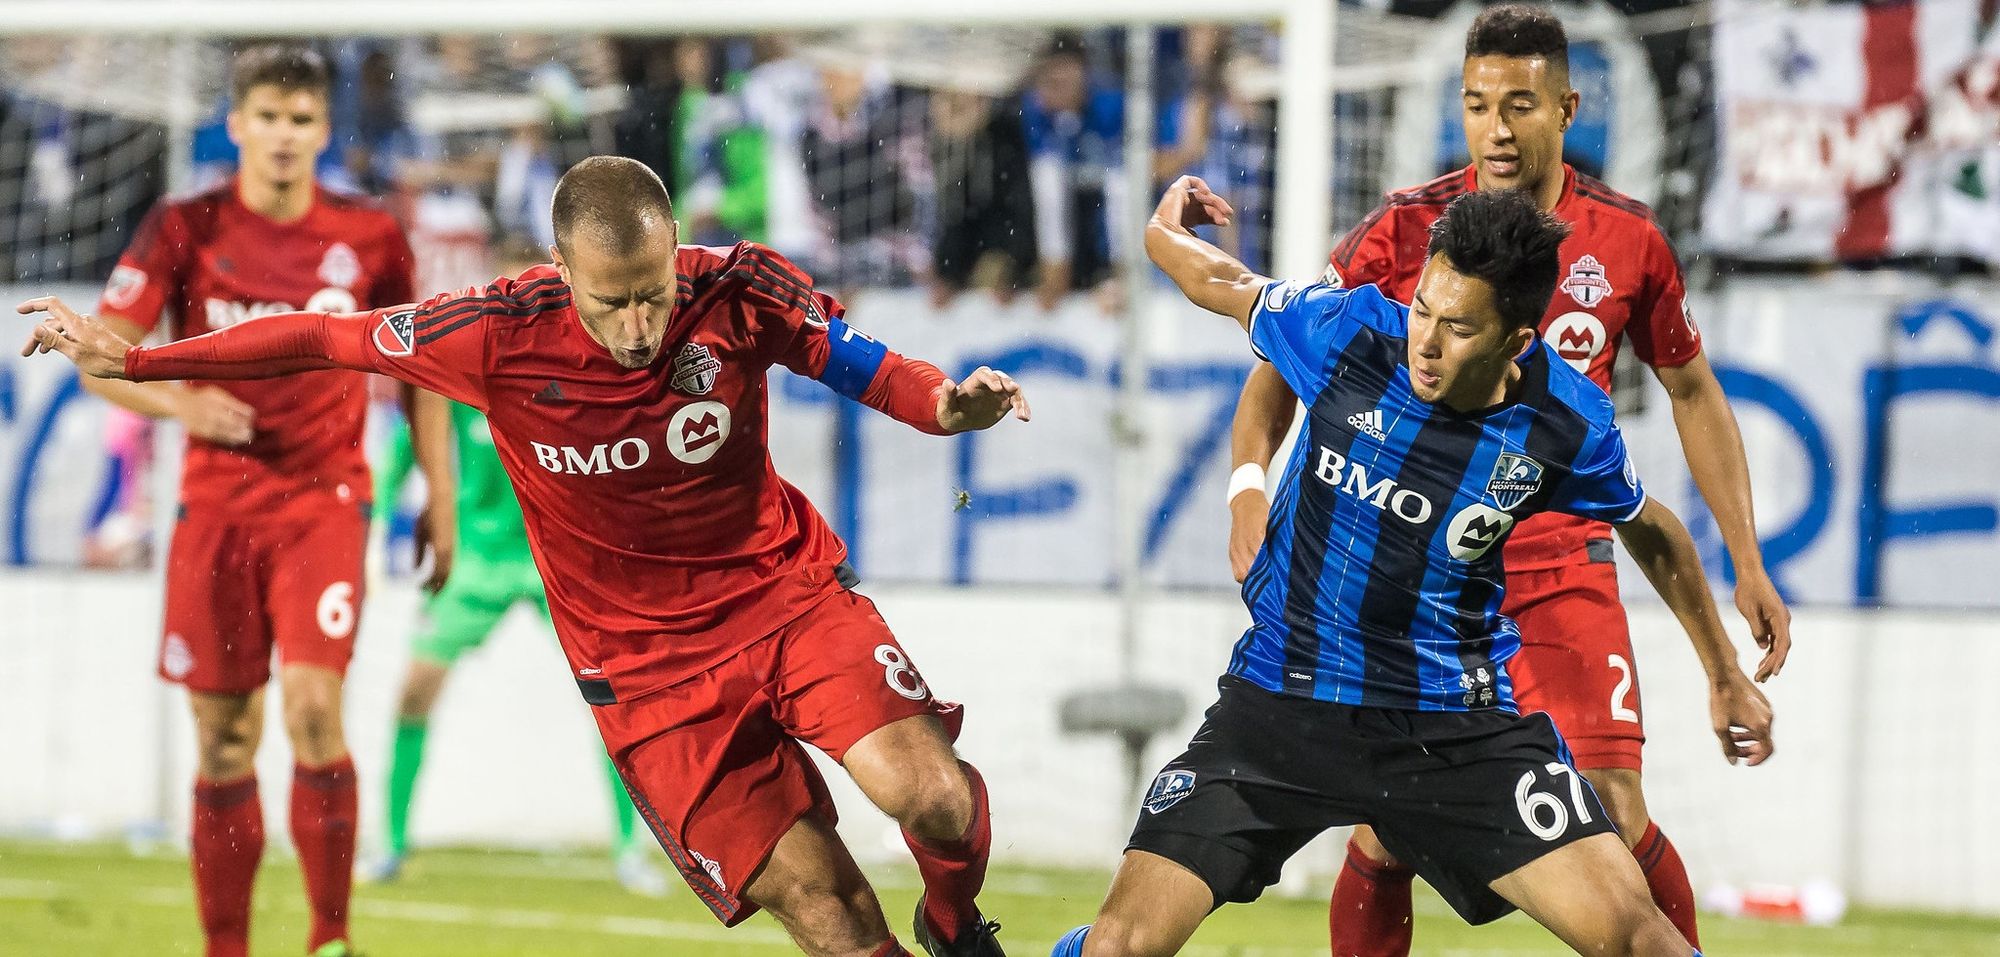 TFC Flashback: An all-time playoff classic against Montreal